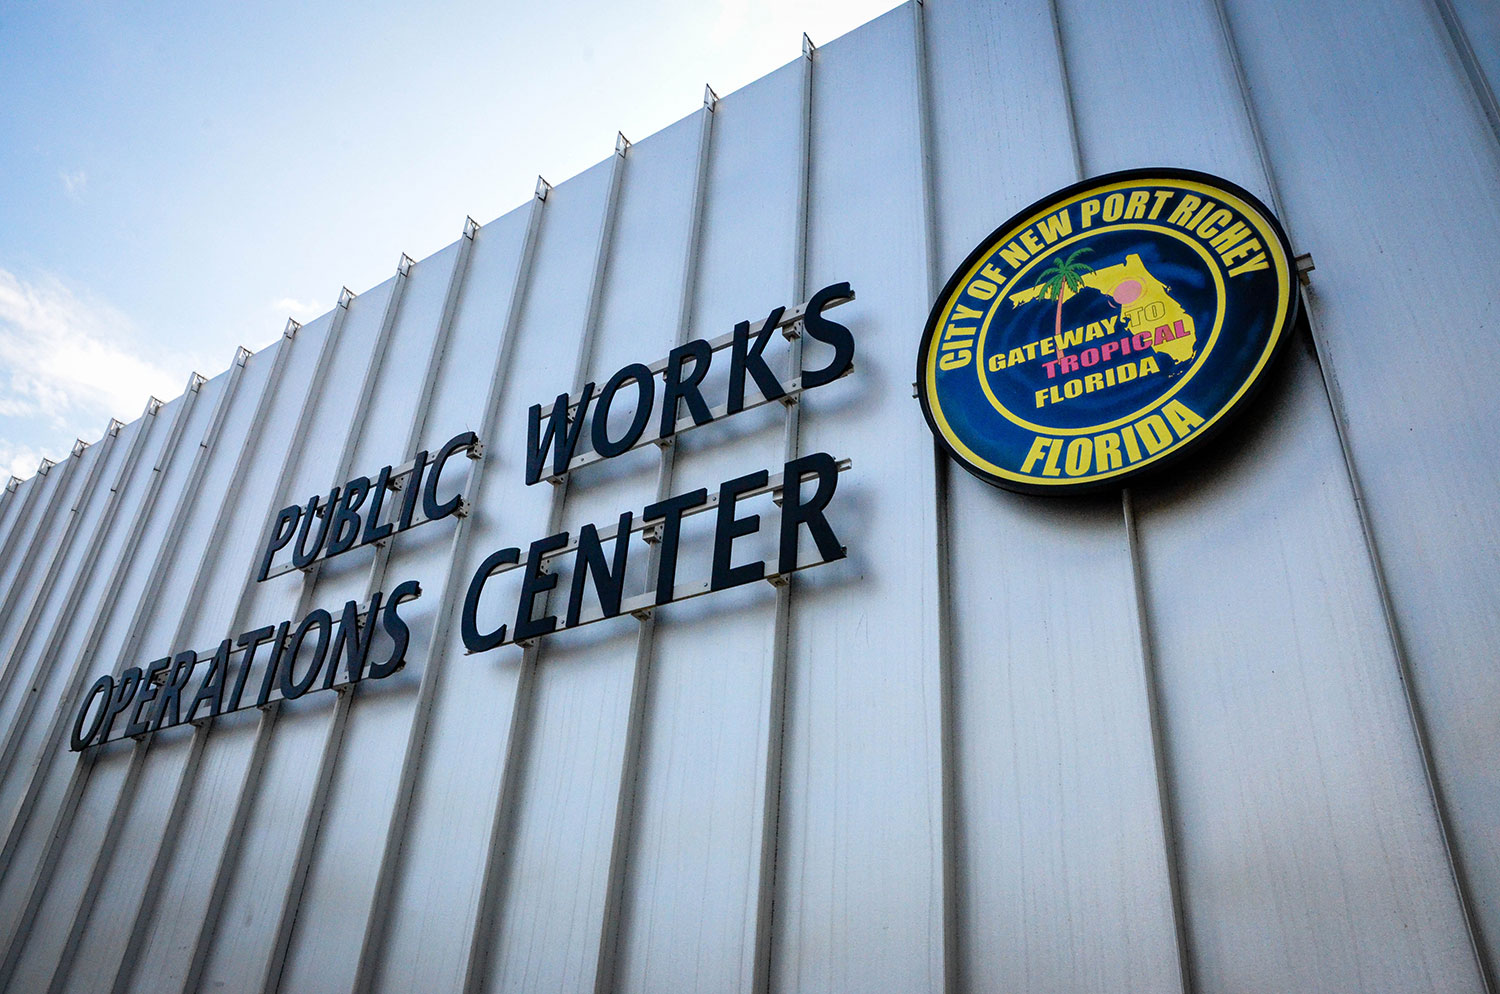 Building exterior, closeup of the words "Public Works Operations Center" next to the New Port Richey city seal.